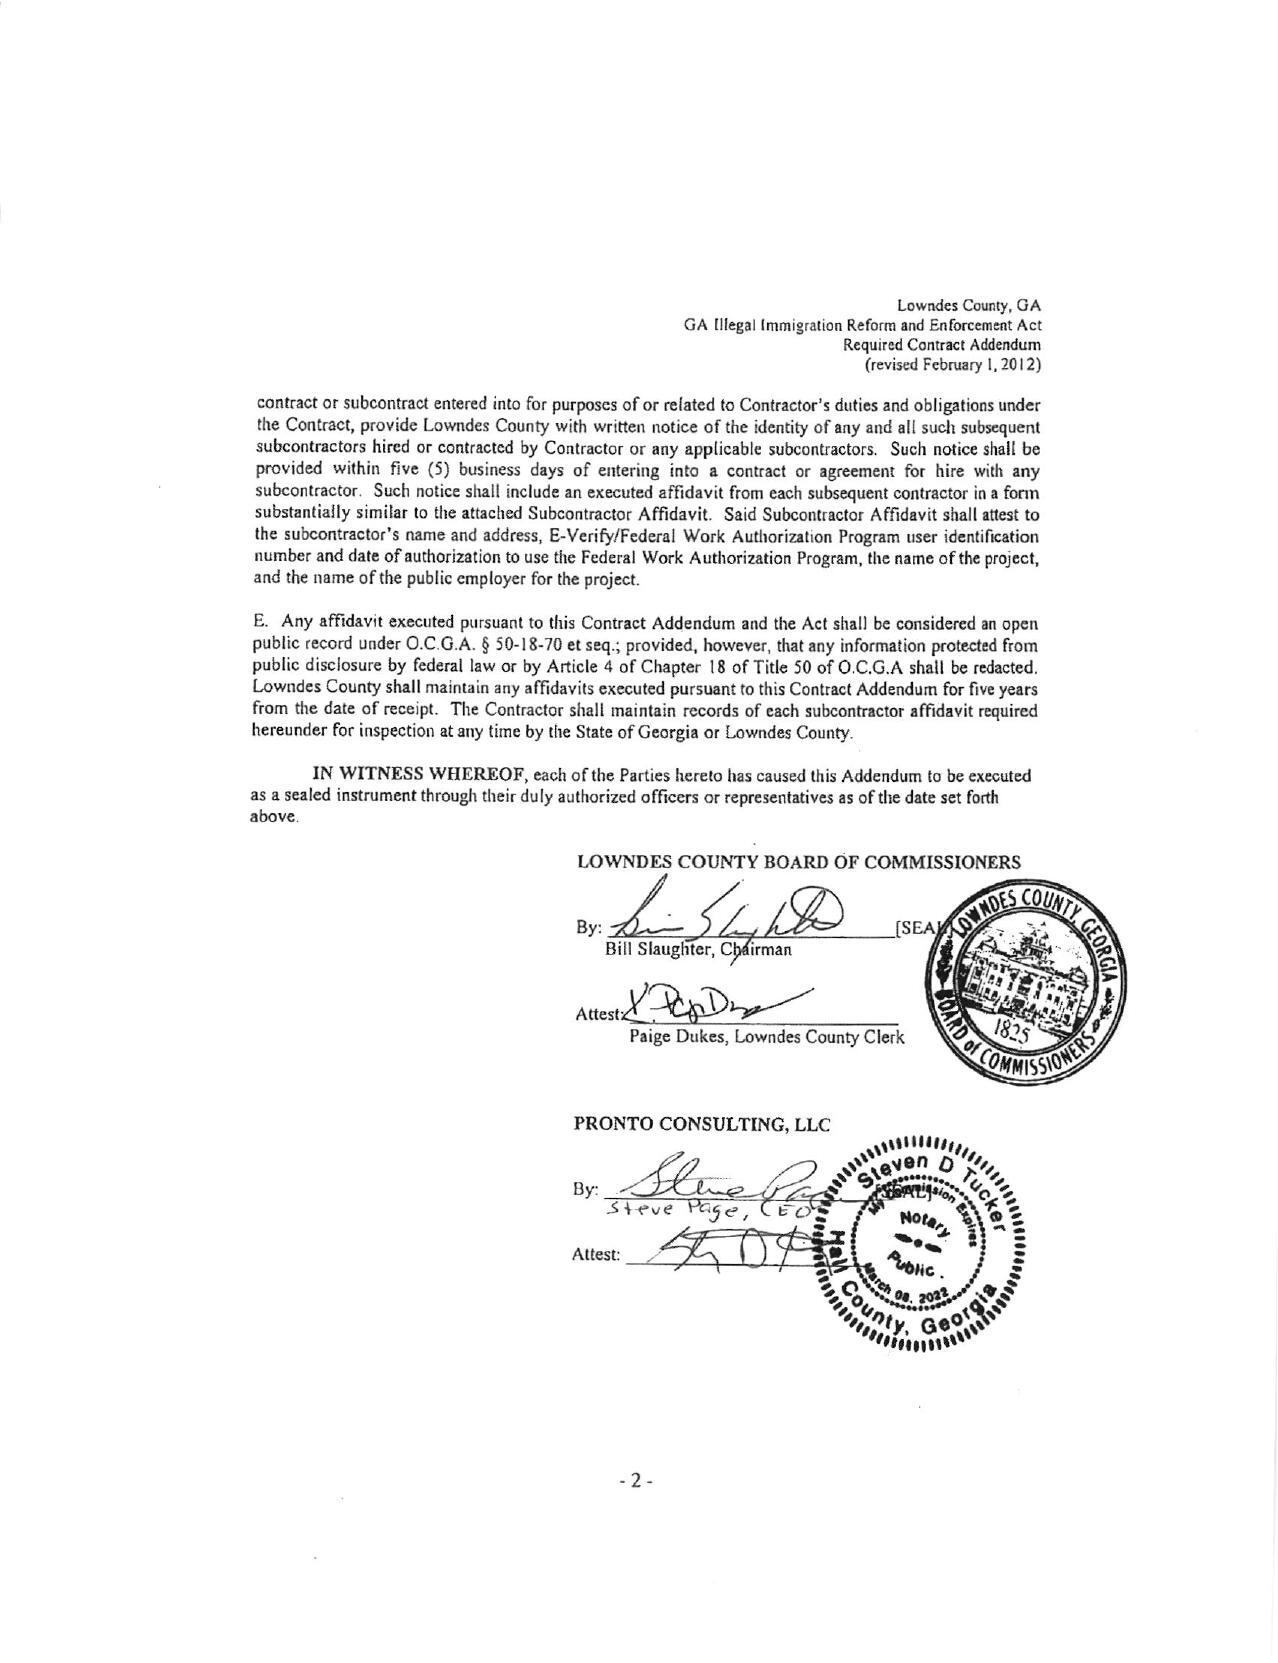 the Contract, provide Lowndes County with written notice of the identity of any and all such subsequent